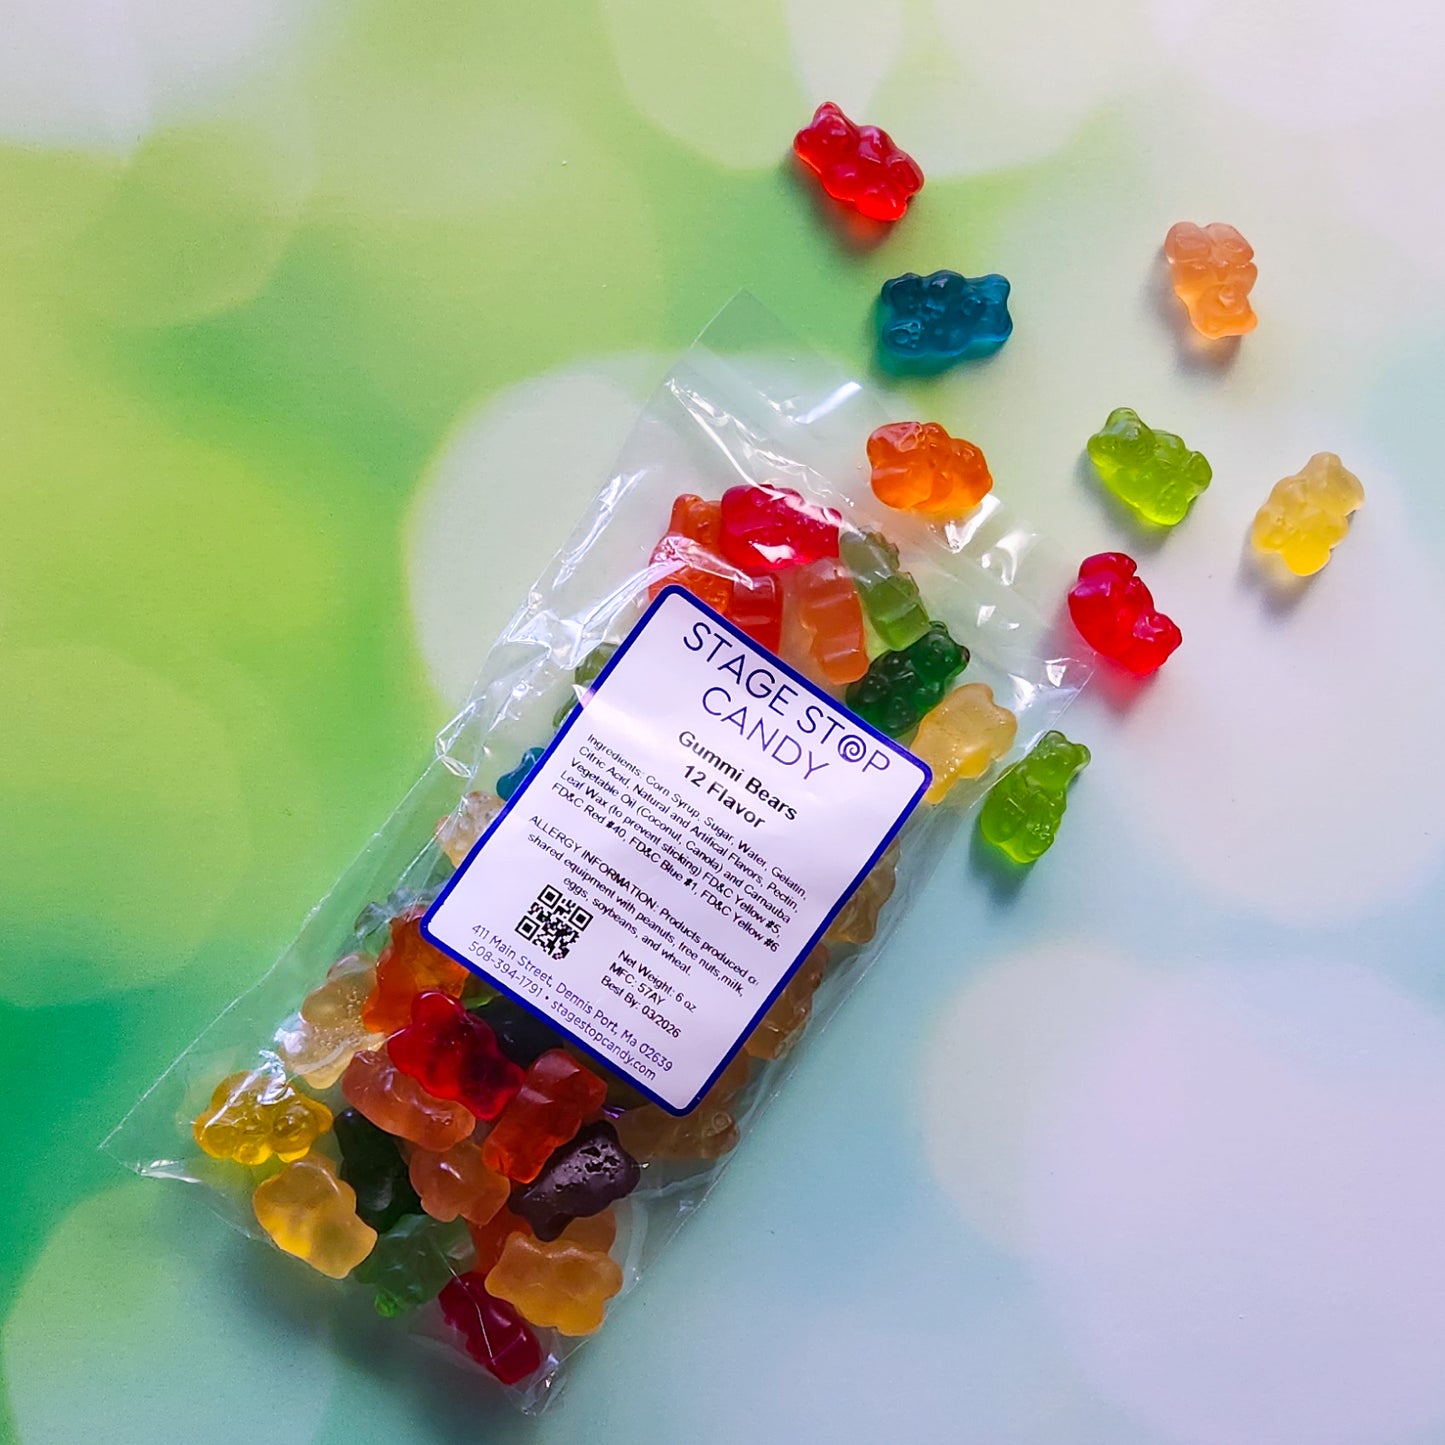 Enjoy a 6-ounce bag of our 12 Flavor Gummi Bears, featuring a delicious mix of Cherry, Pink Grapefruit, Watermelon, and more. Perfect for snacking, these chewy treats offer a burst of fruity flavors in every bite.